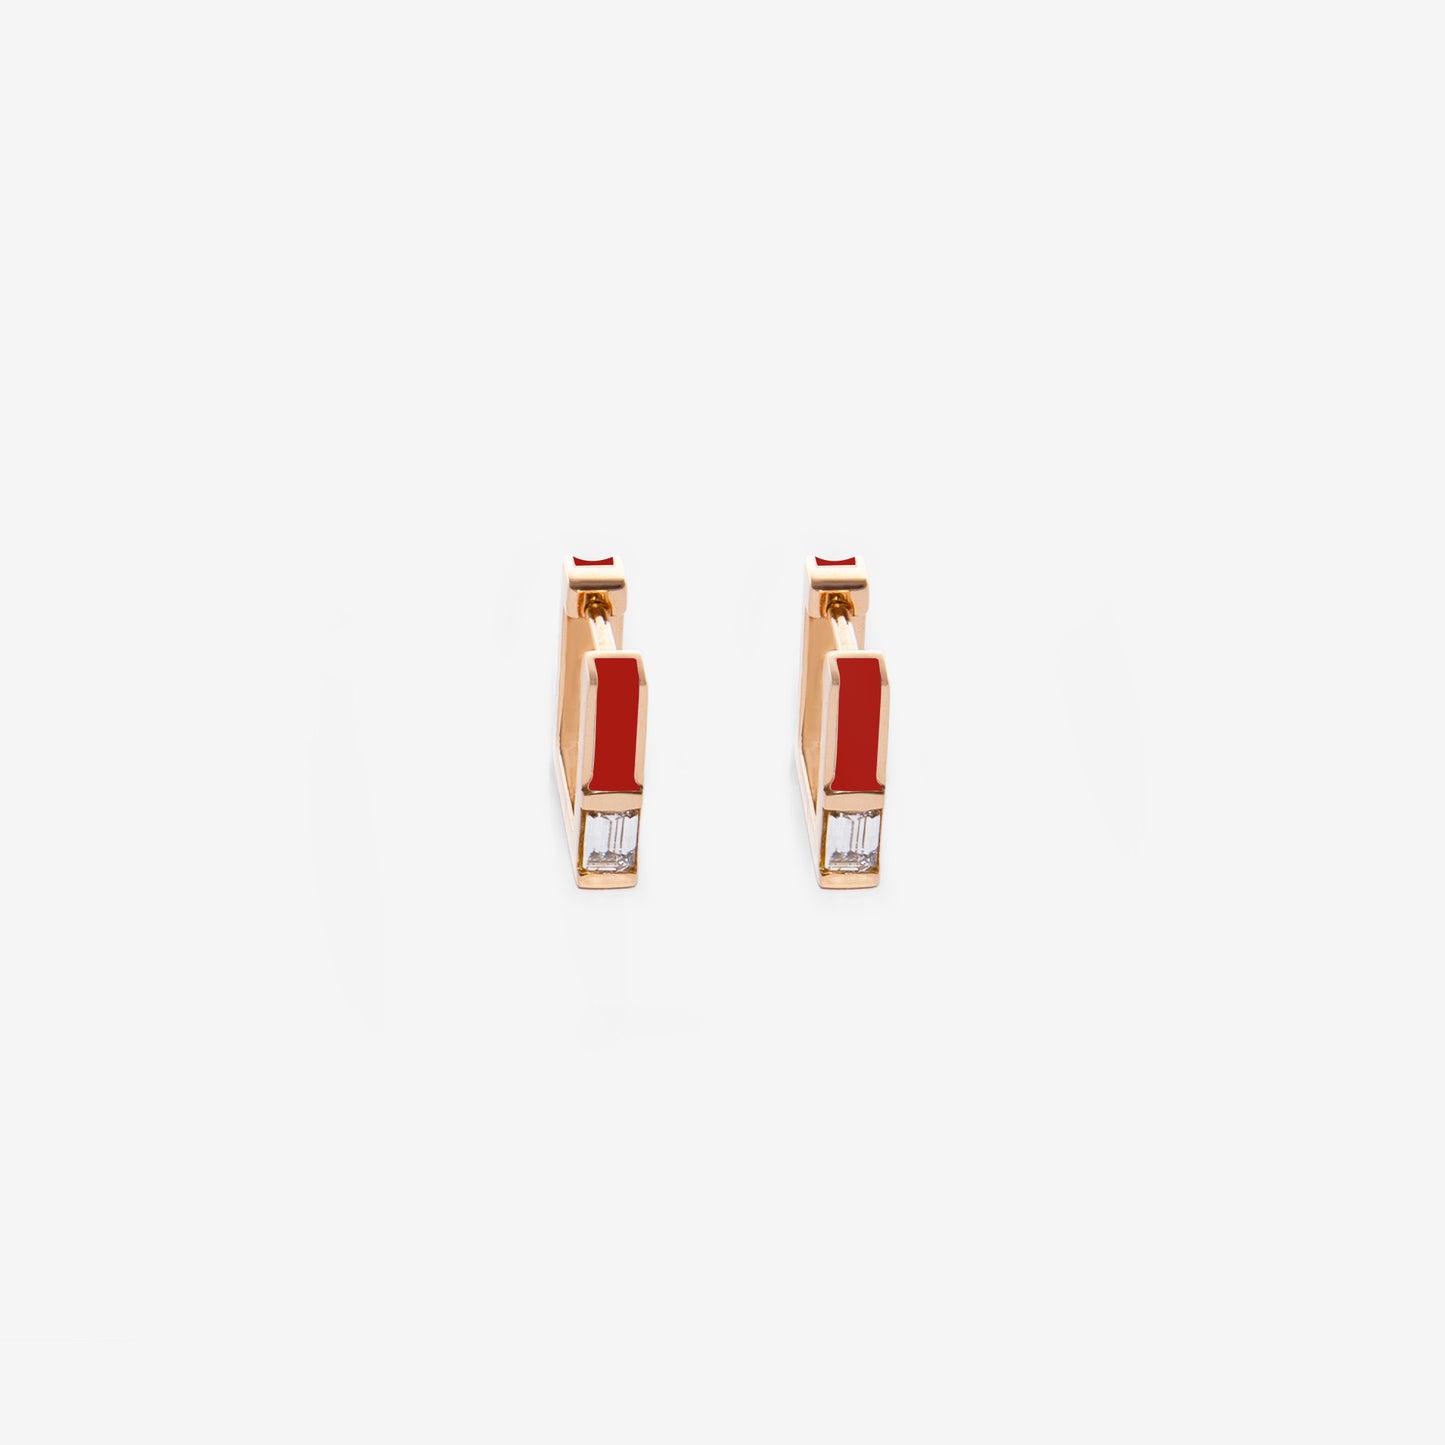 Square burgundy earrings with diamonds